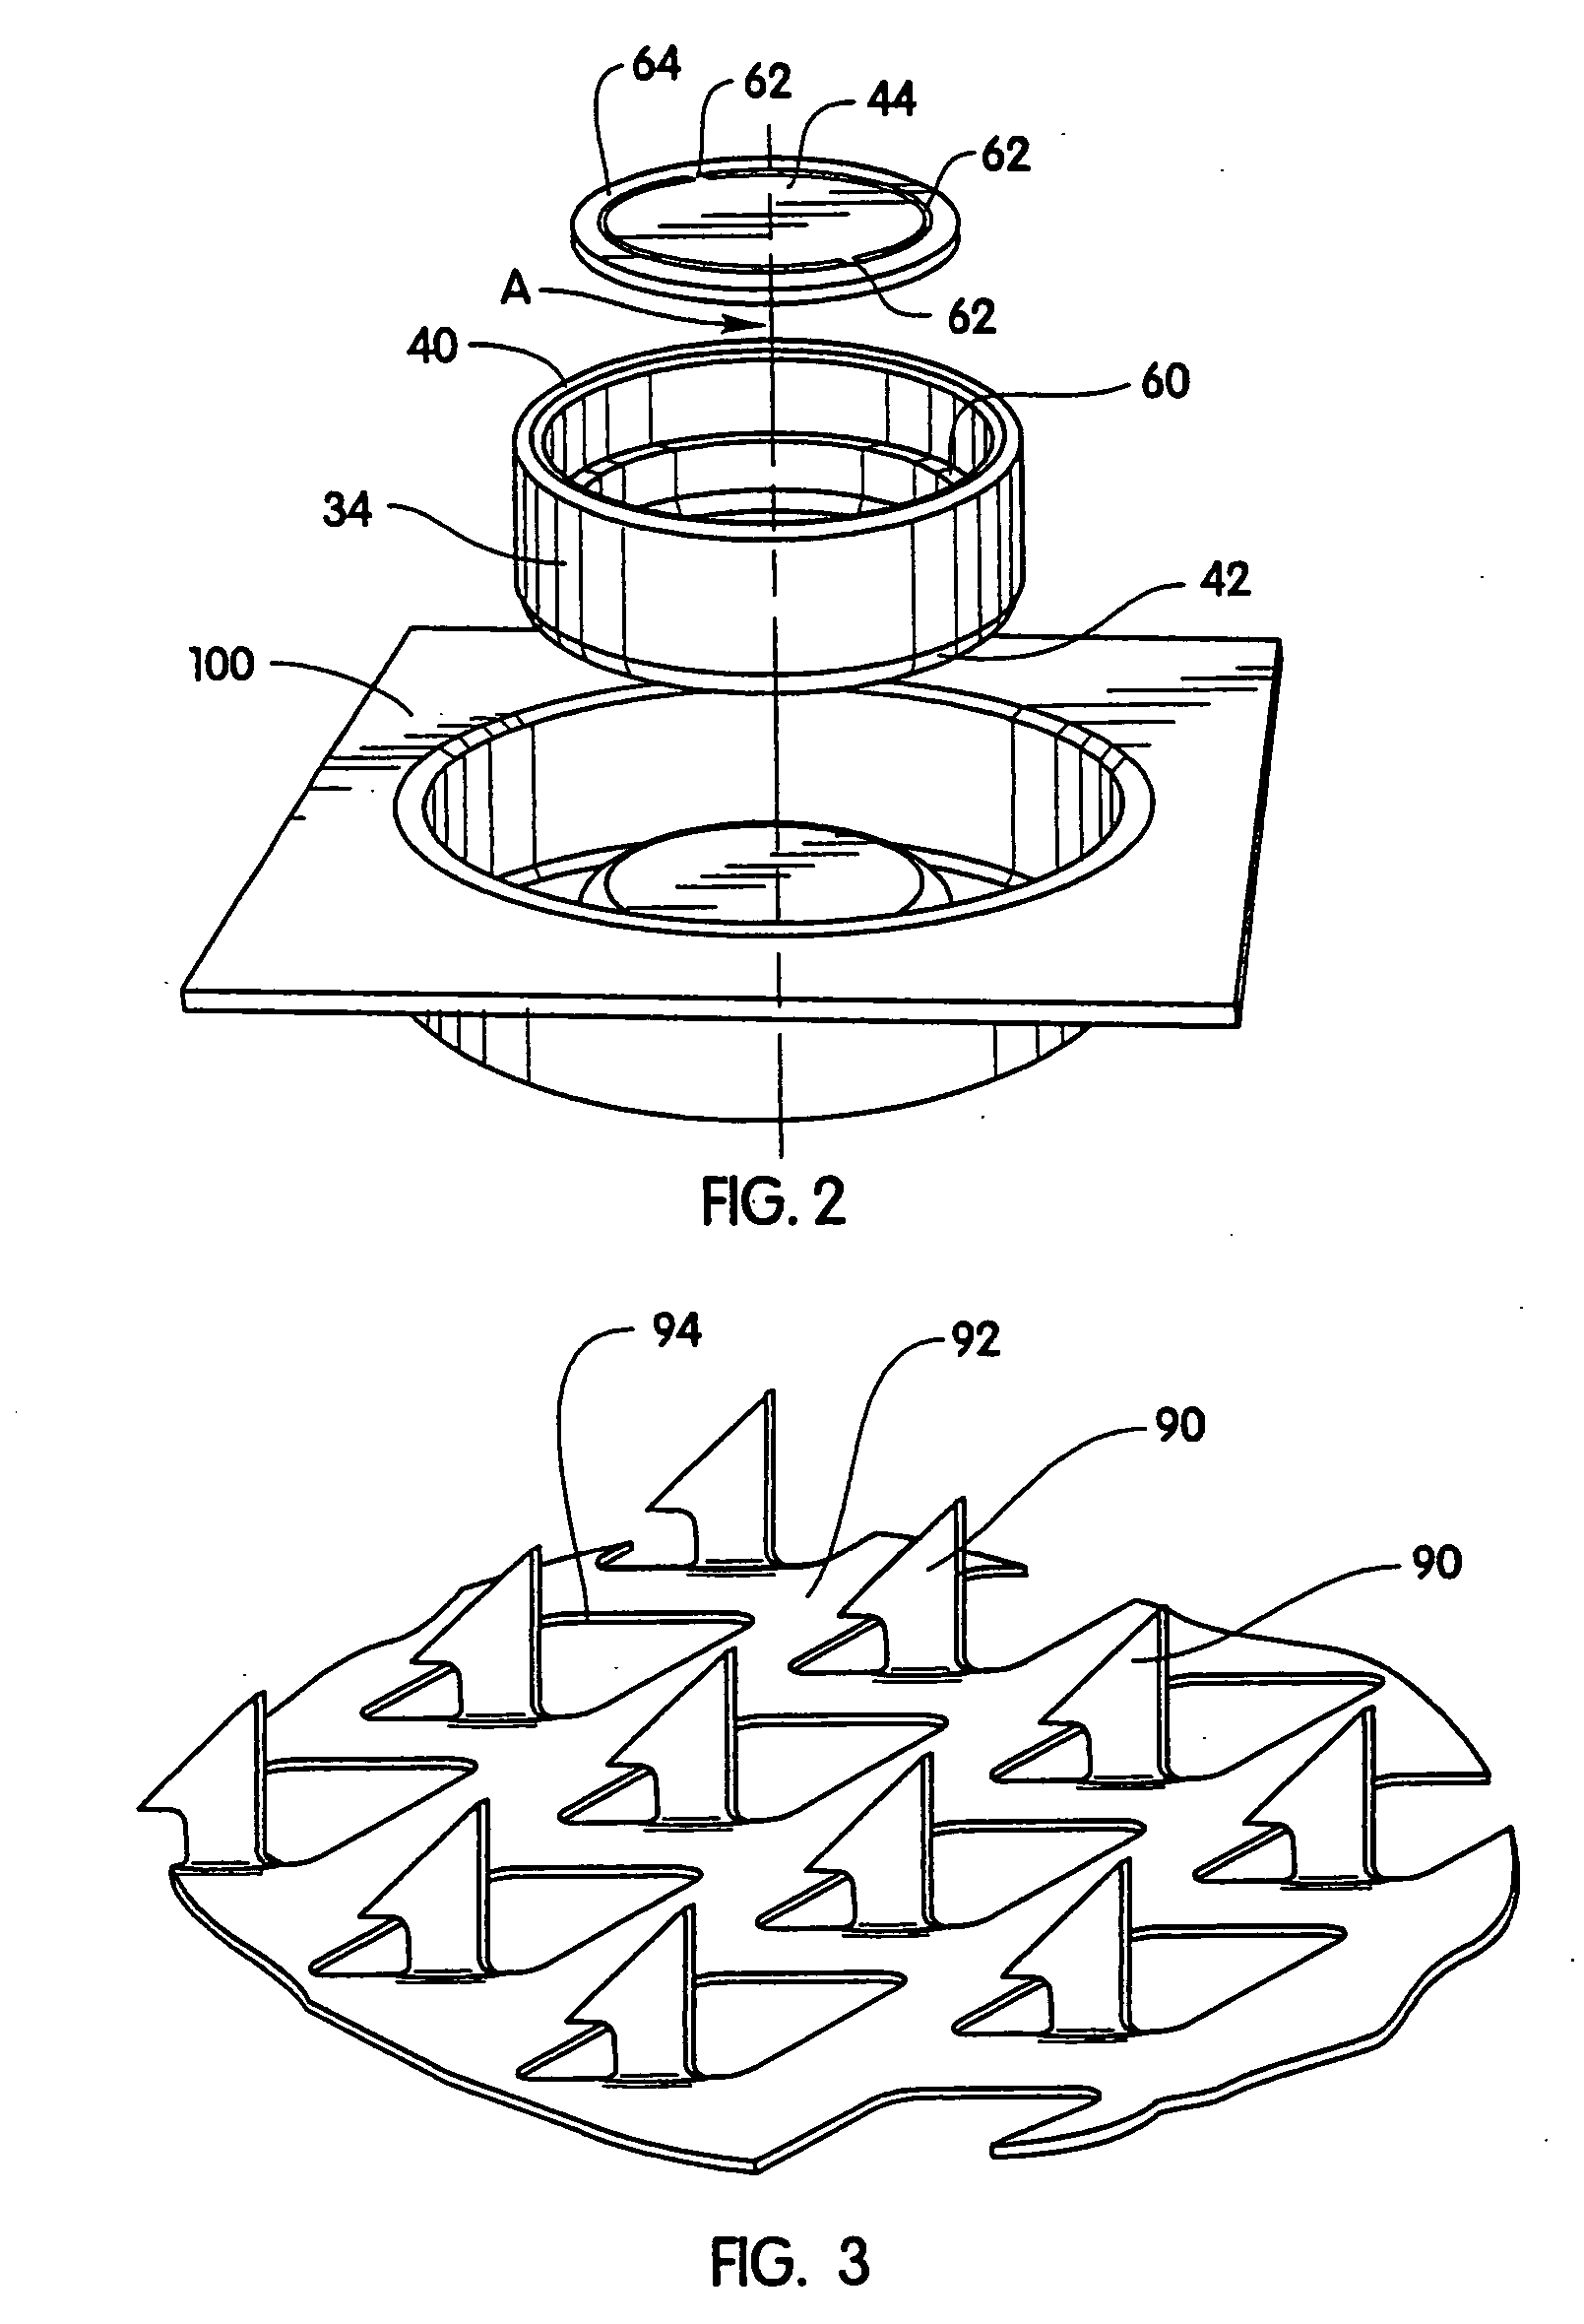 Microprotrusion member retainer for impact applicator